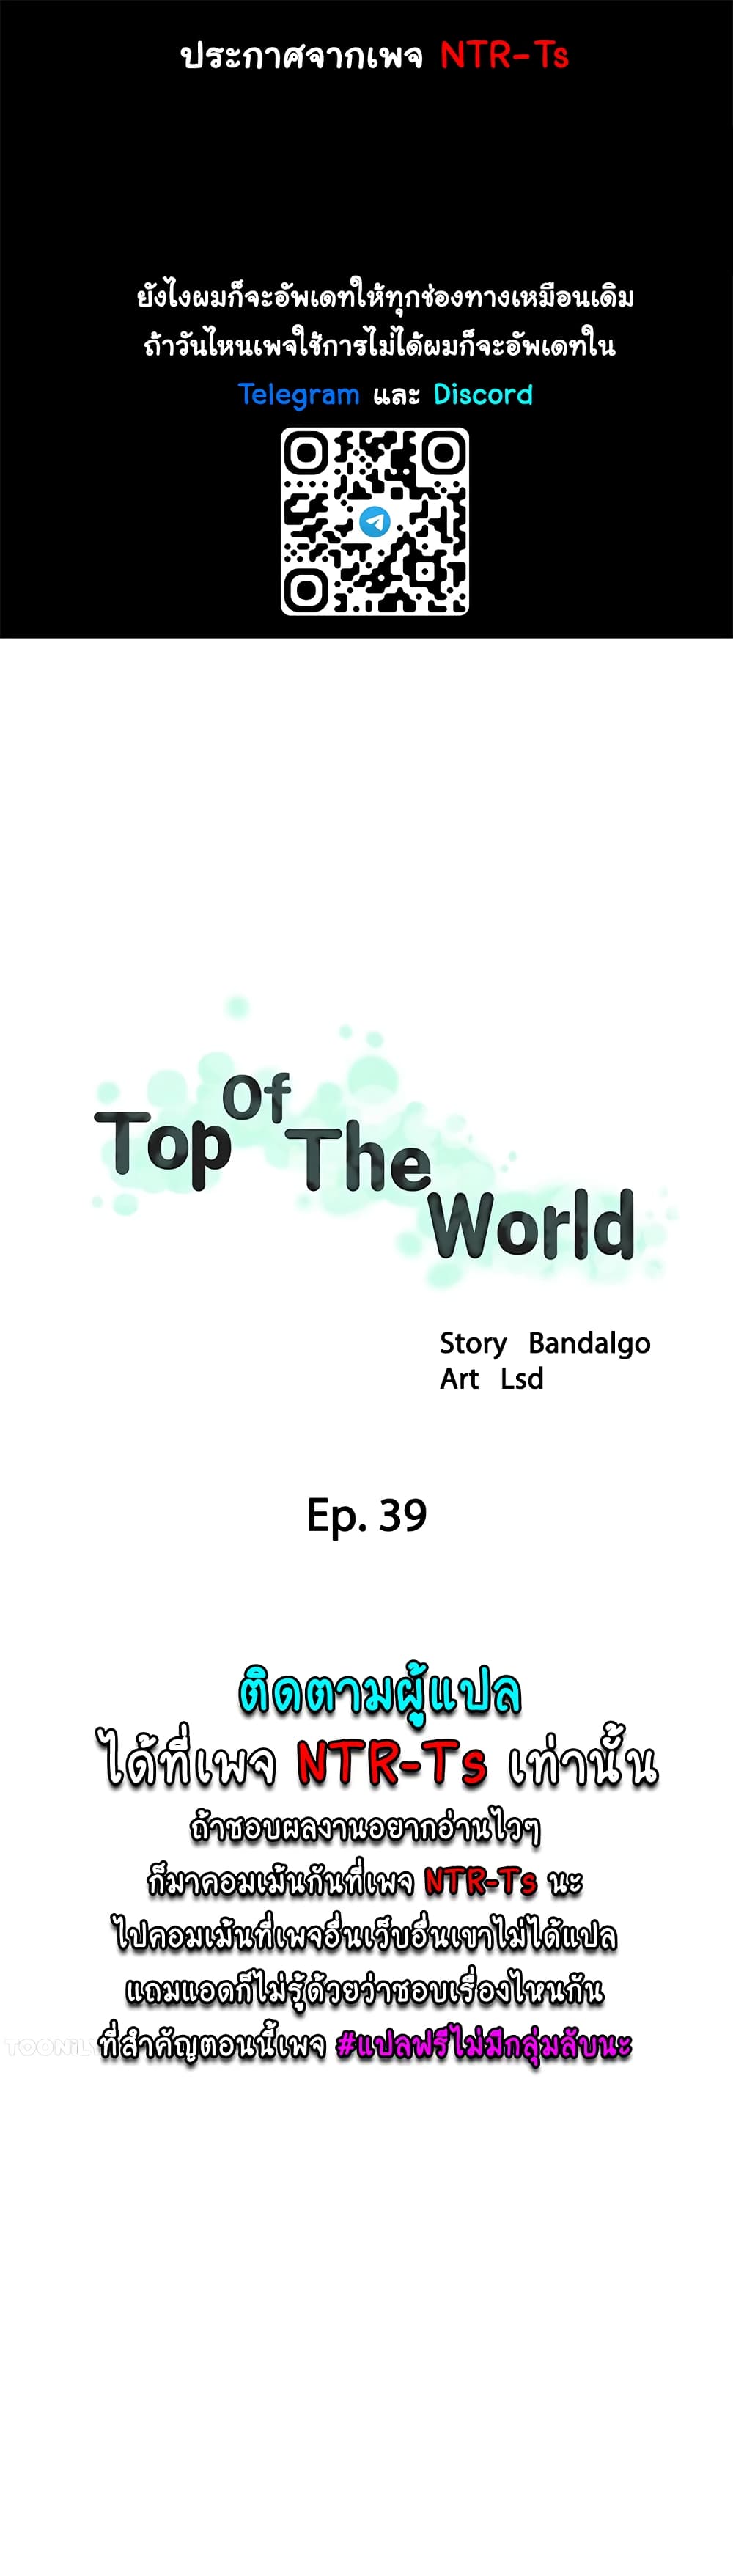 Top Of The World 39-39